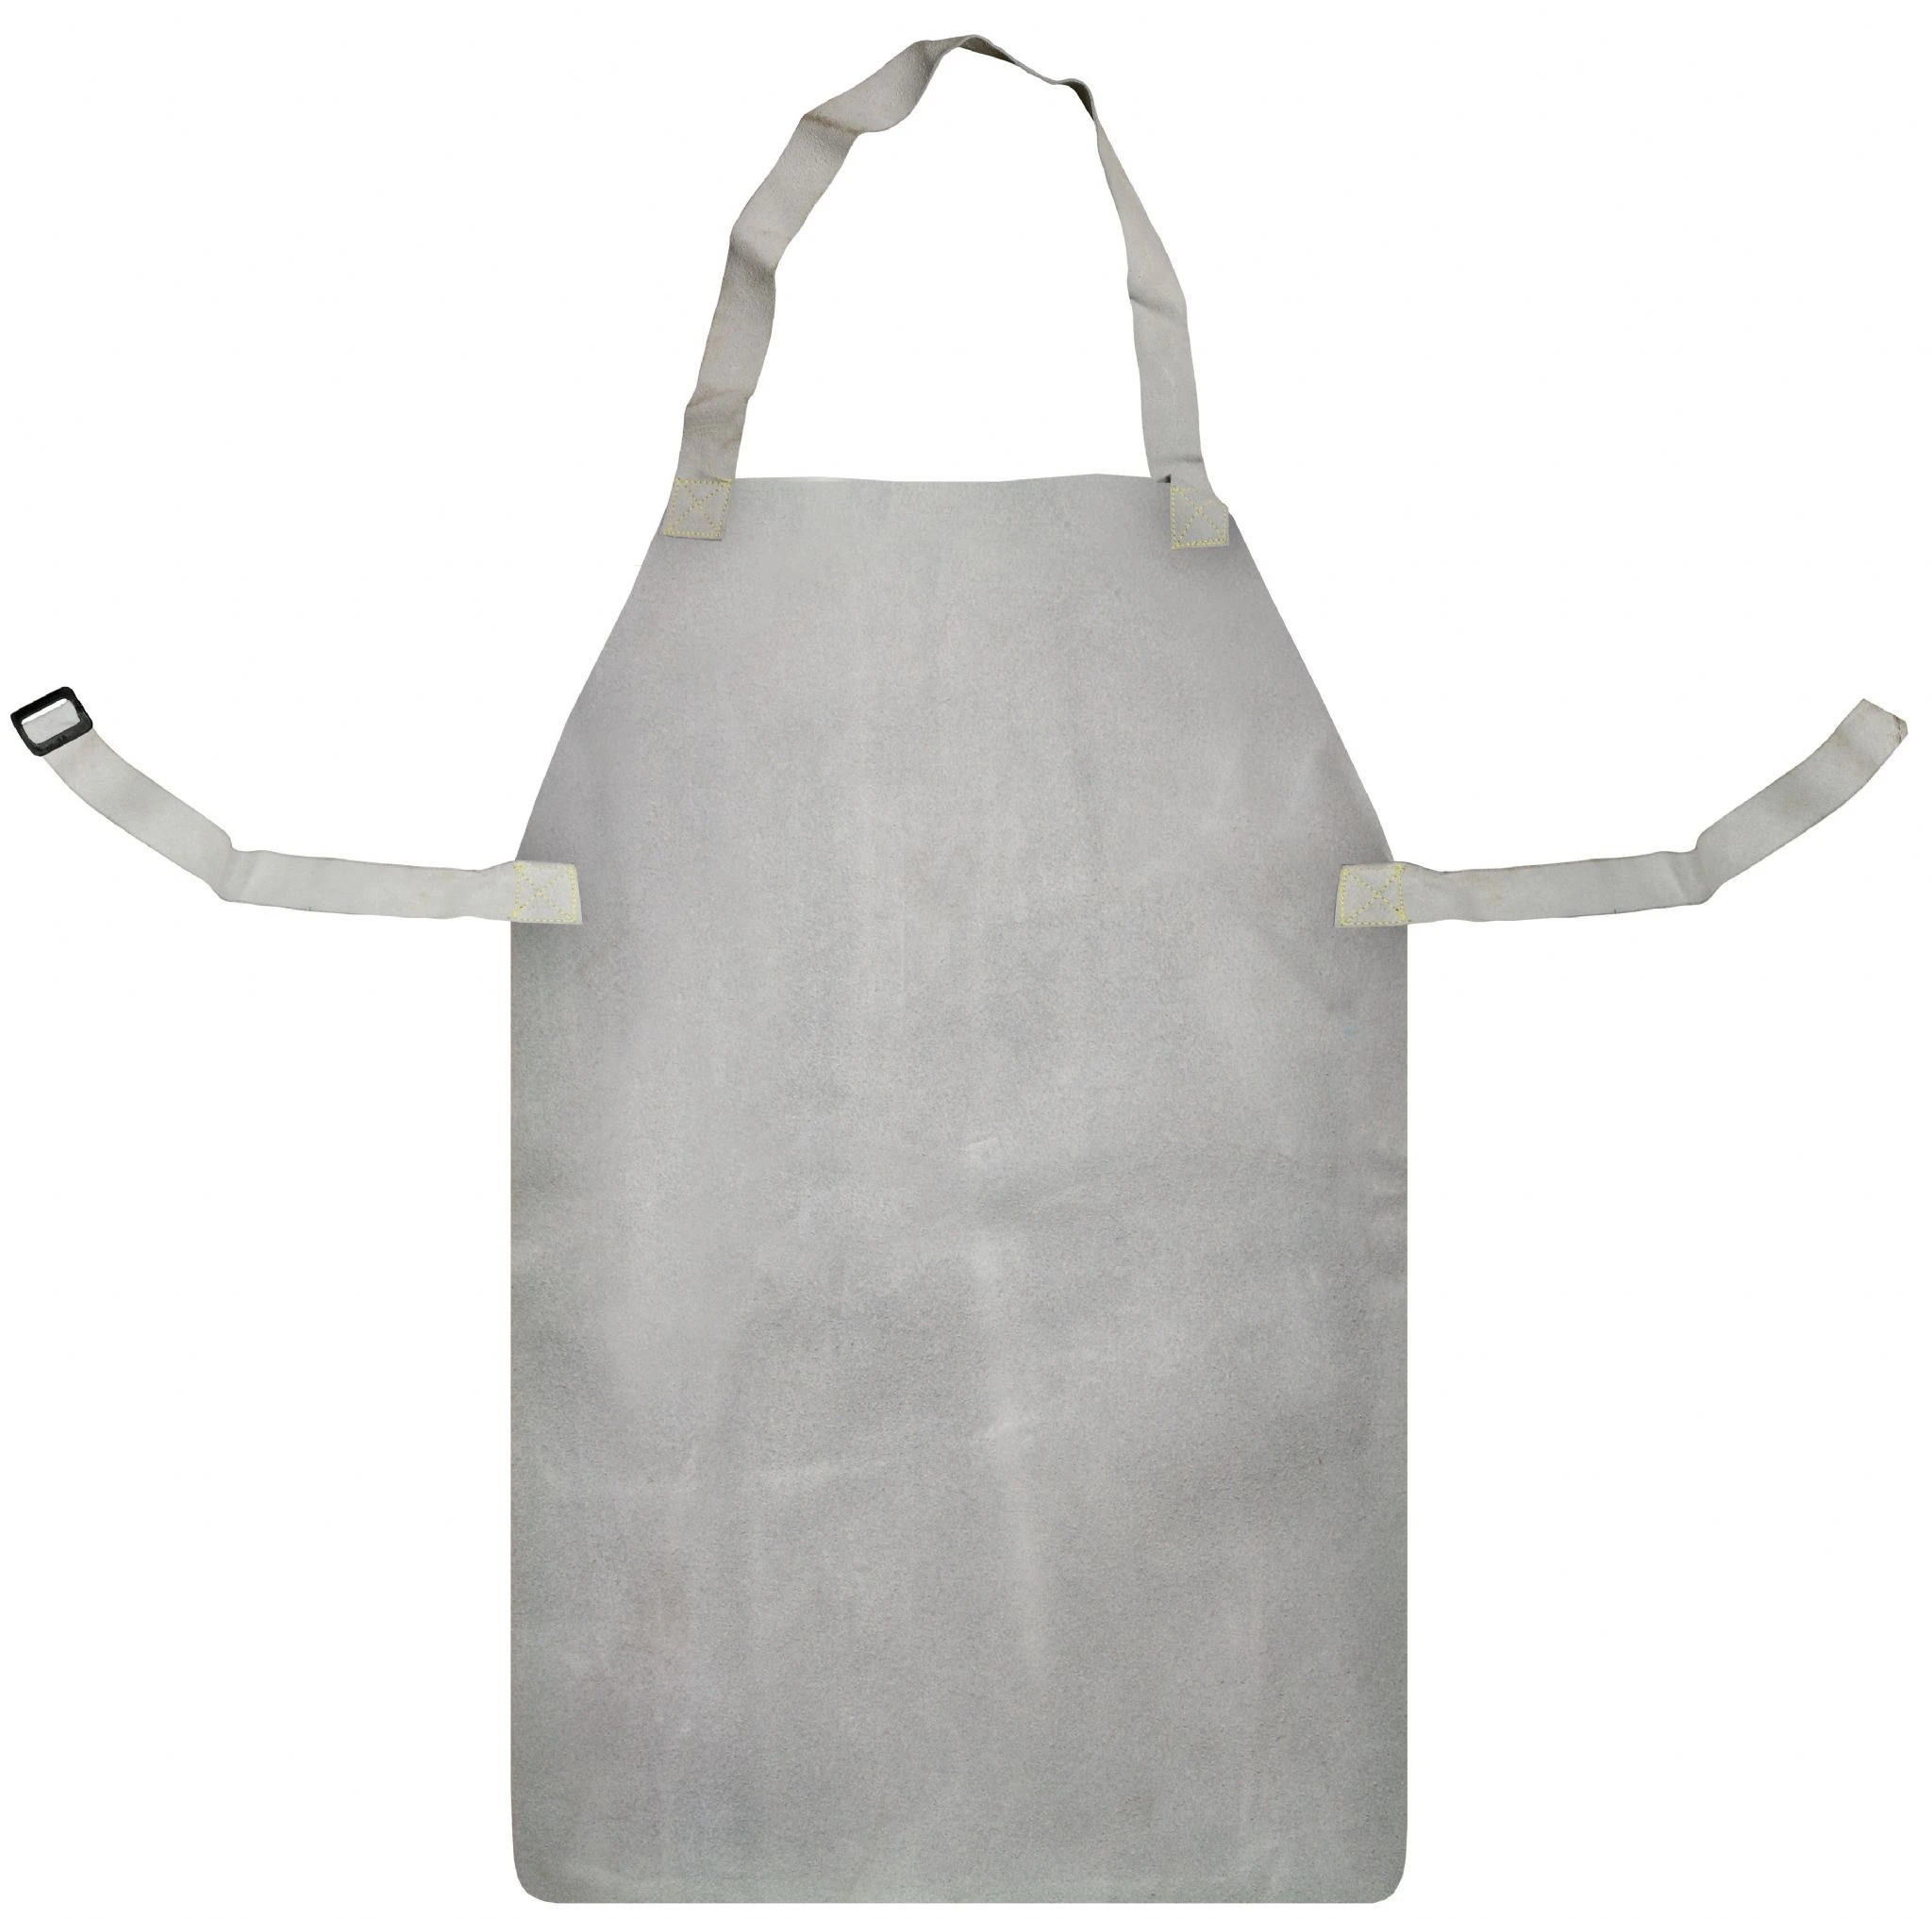 New  Welding Protective Apron for men safety